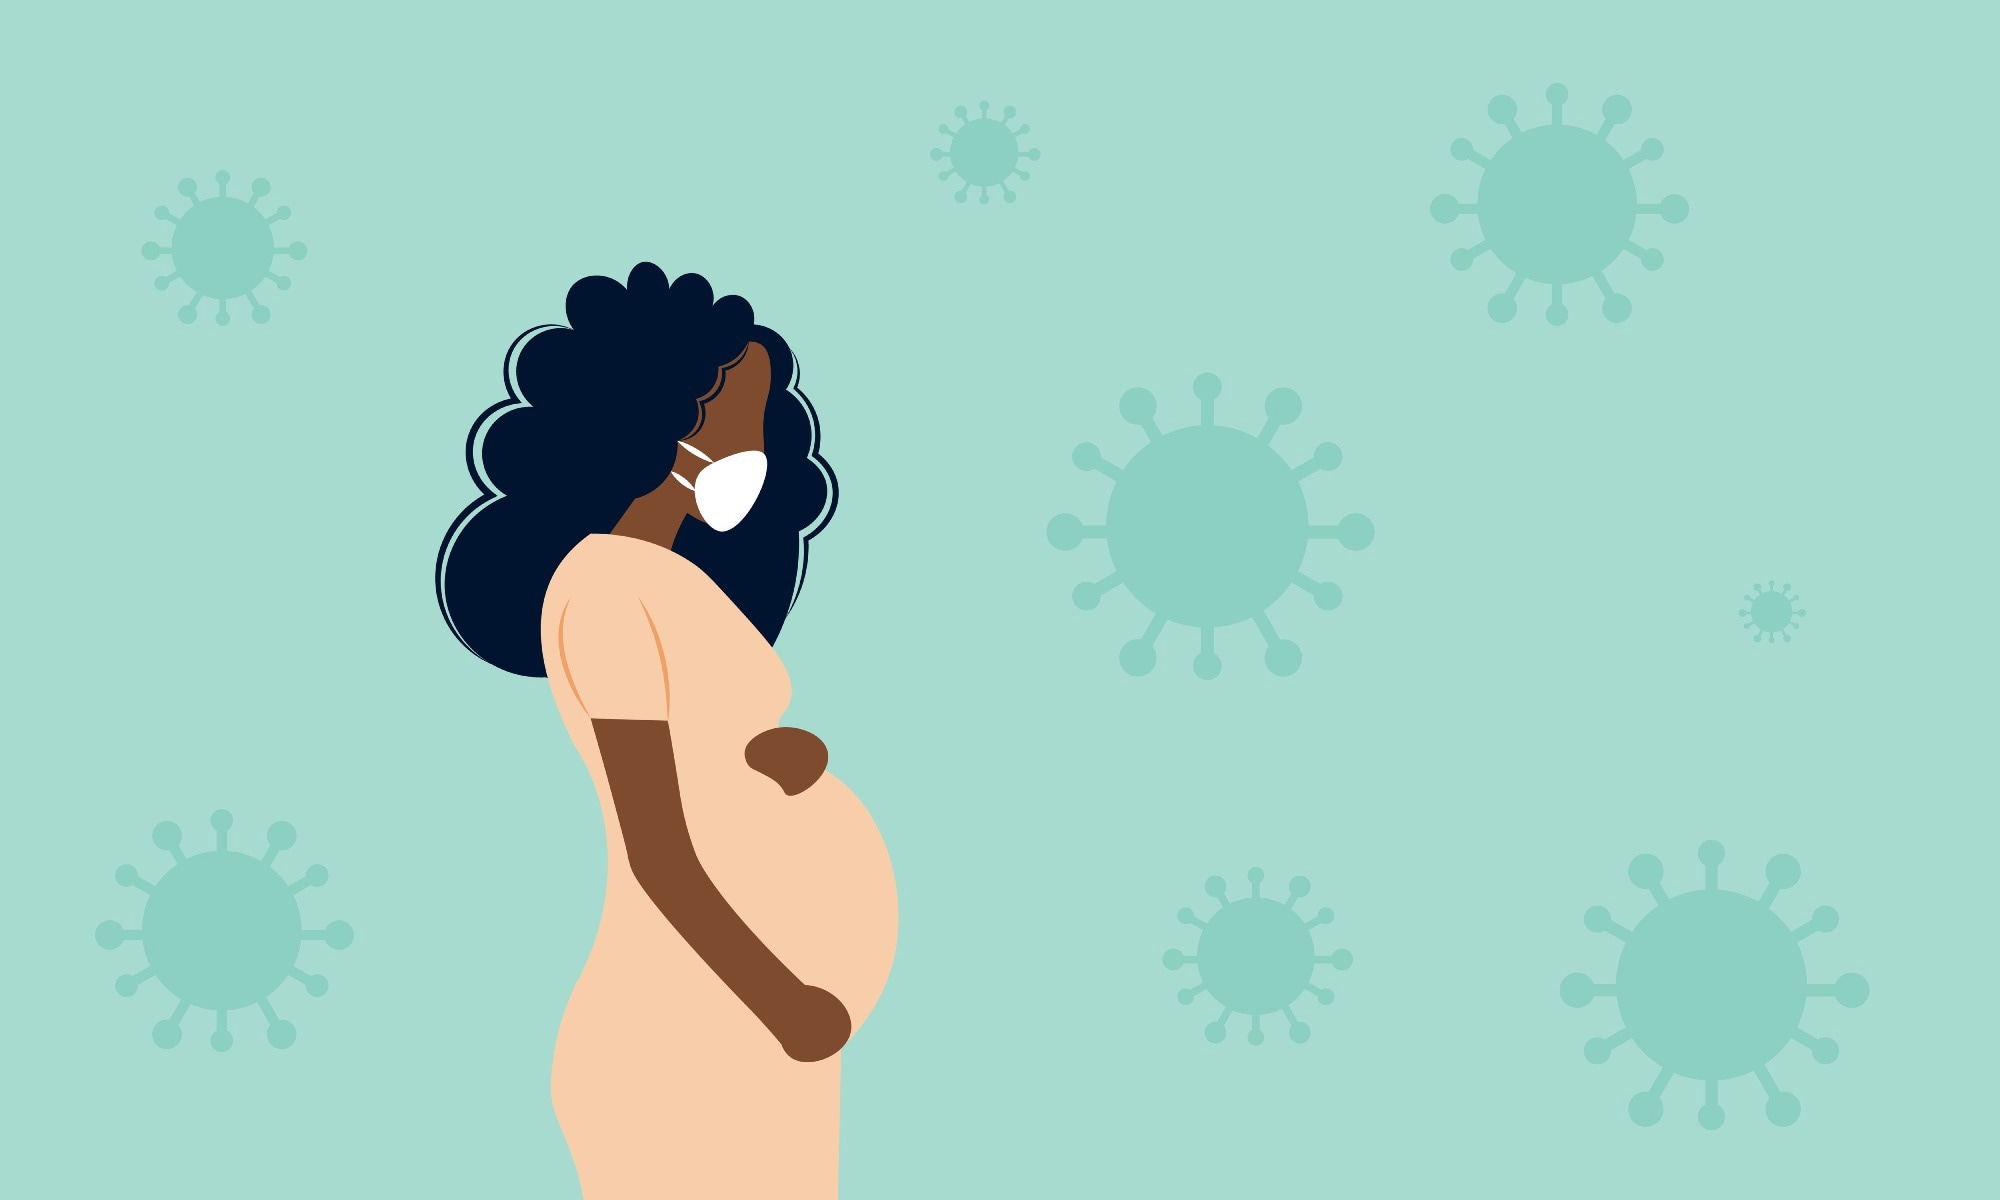 Study: Early pregnancy outcomes following COVID-19 vaccination and SARS-CoV-2 infection: a national population-based matched cohort study. Image Credit: M M Vieira/Shutterstock